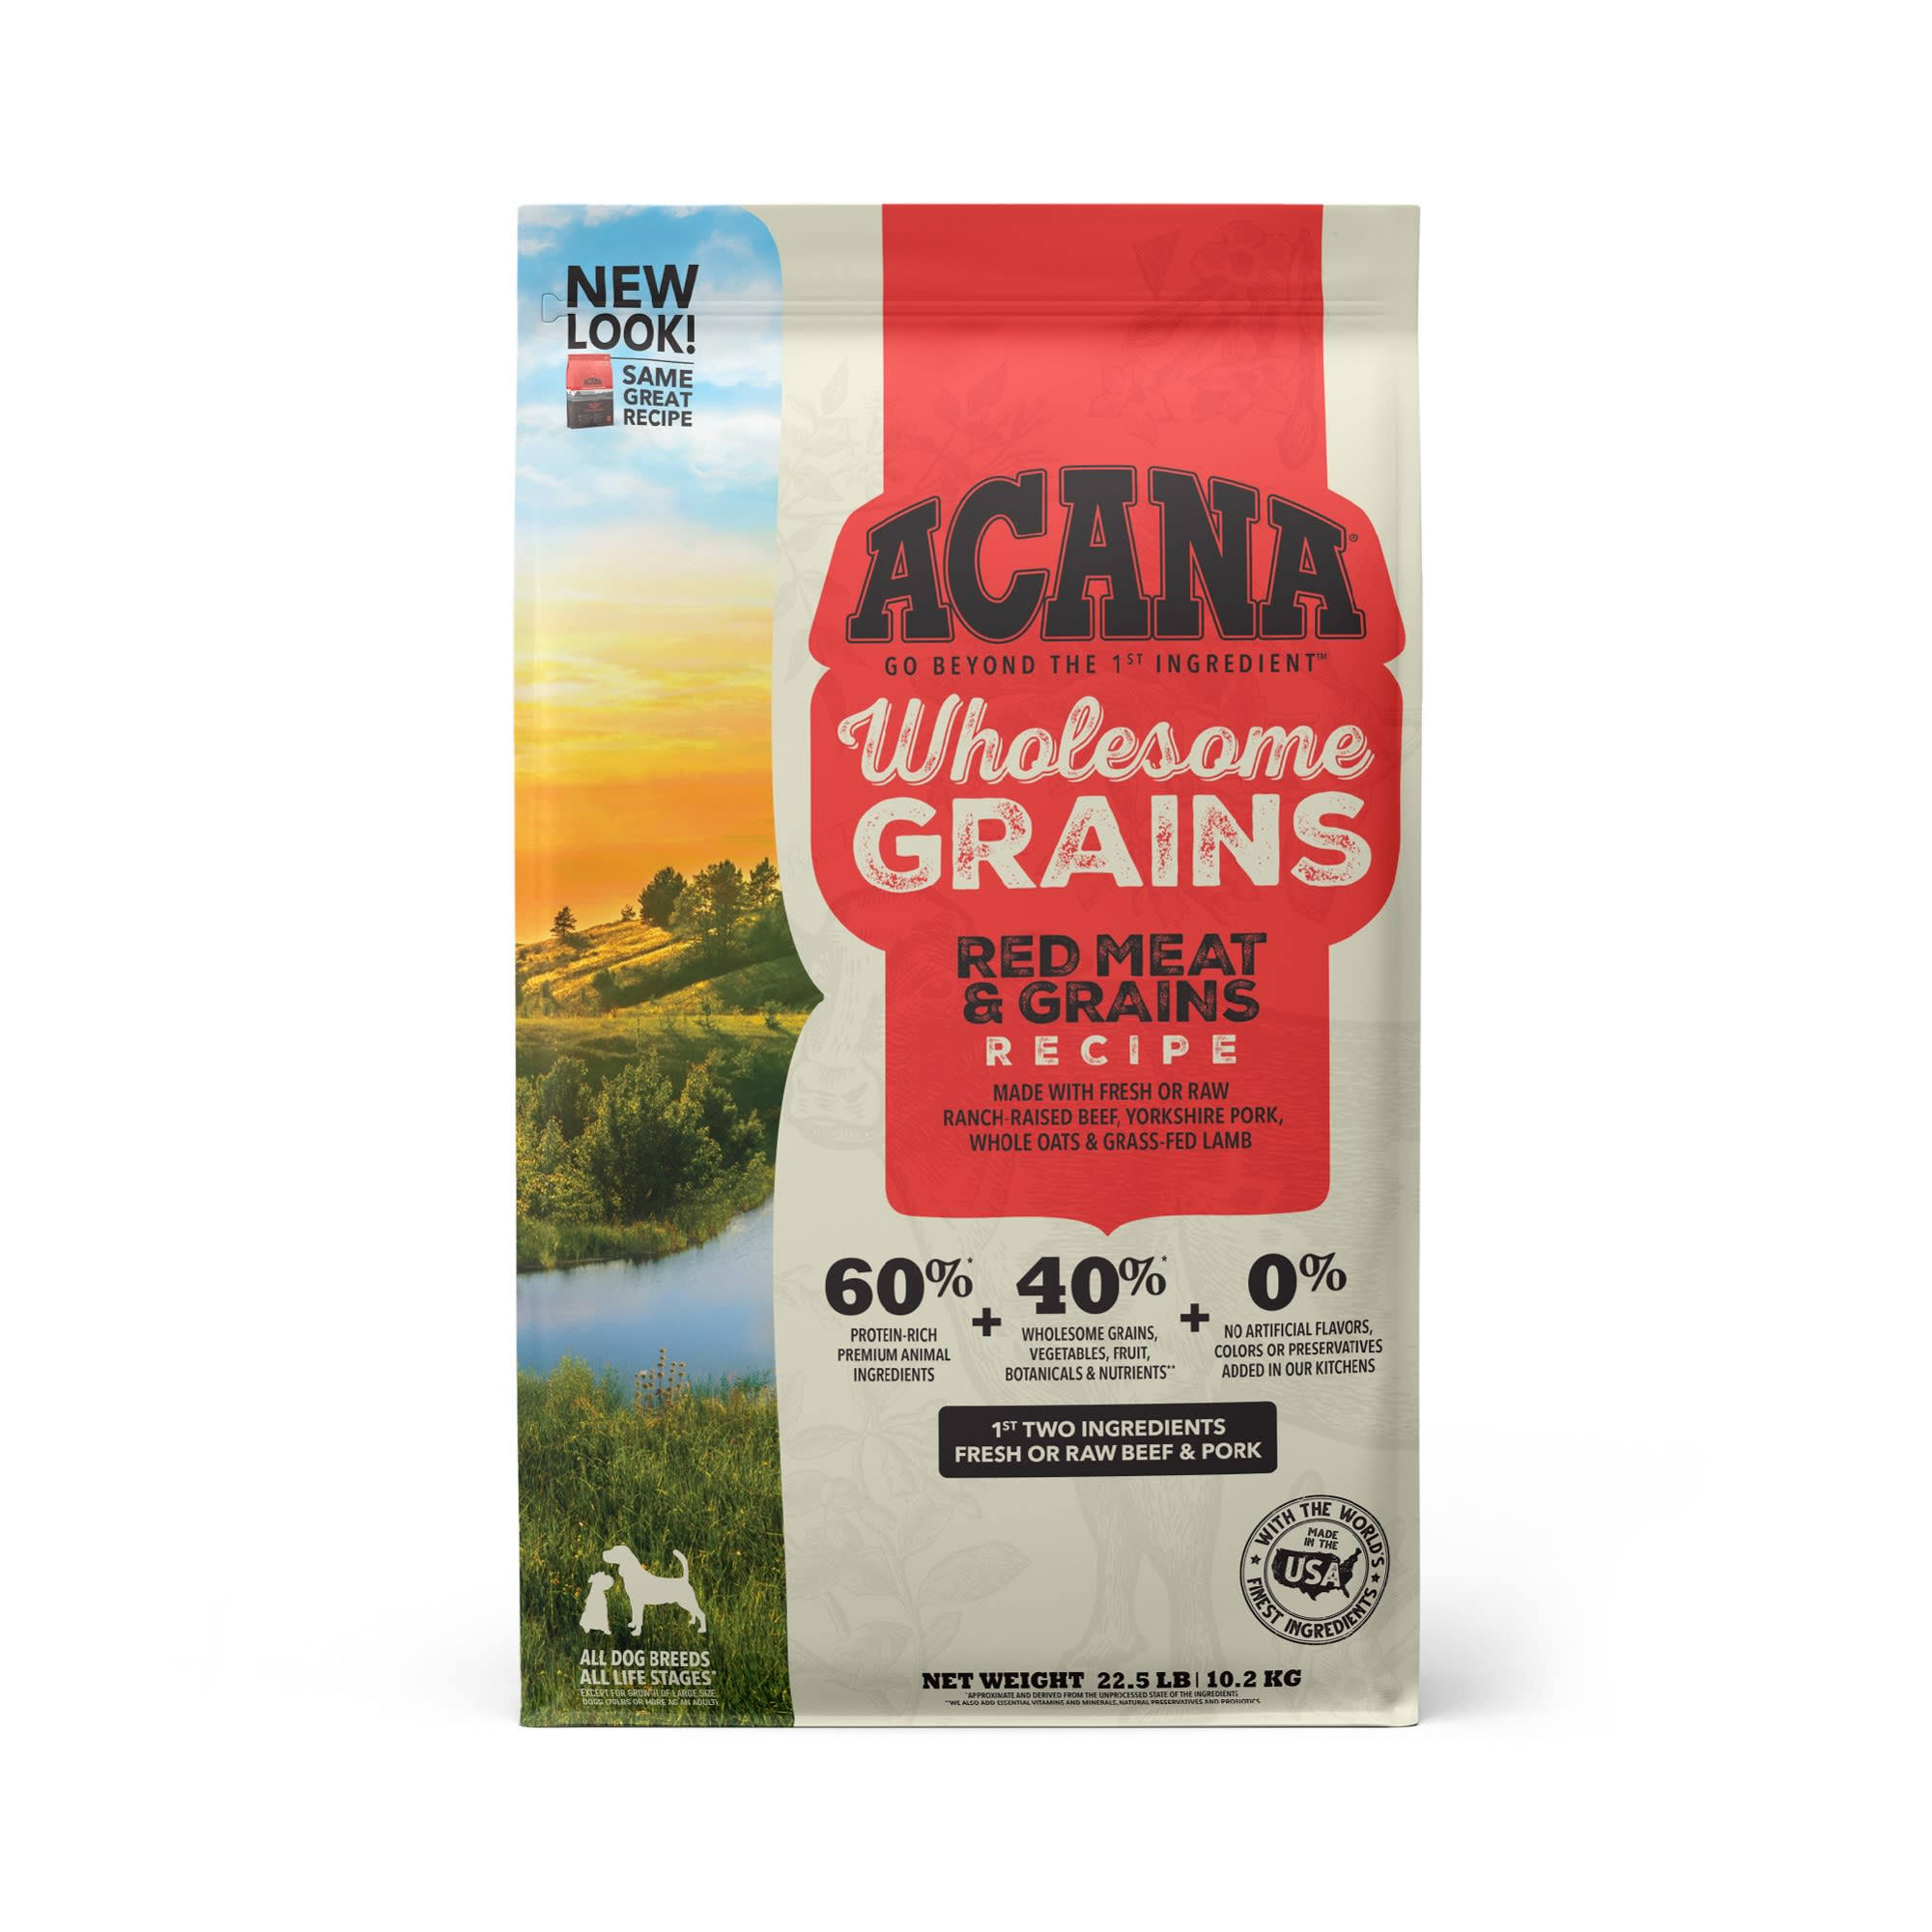 ACANA Wholesome Grains Red Meat Recipe Dry Dog Food 22.5 lbs